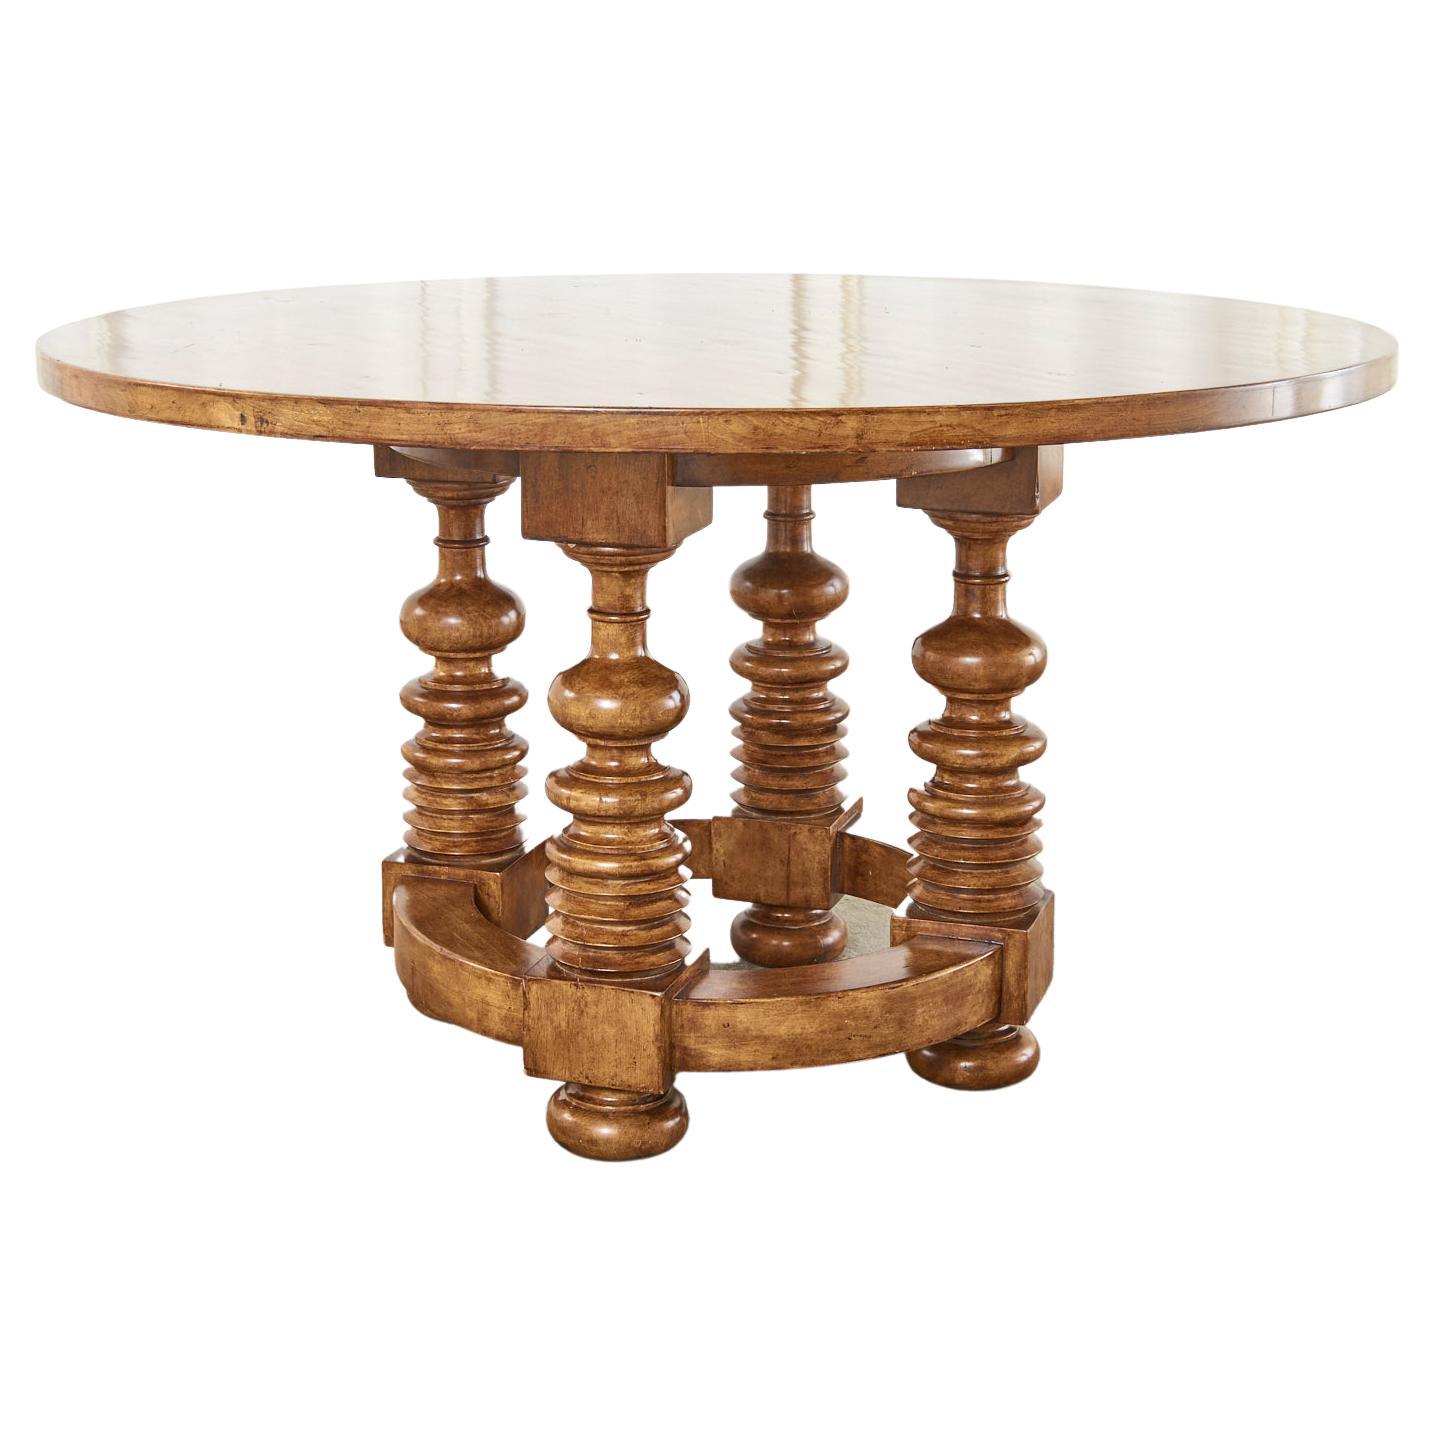 Portuguese Baroque Style Round Dining Room or Center Table